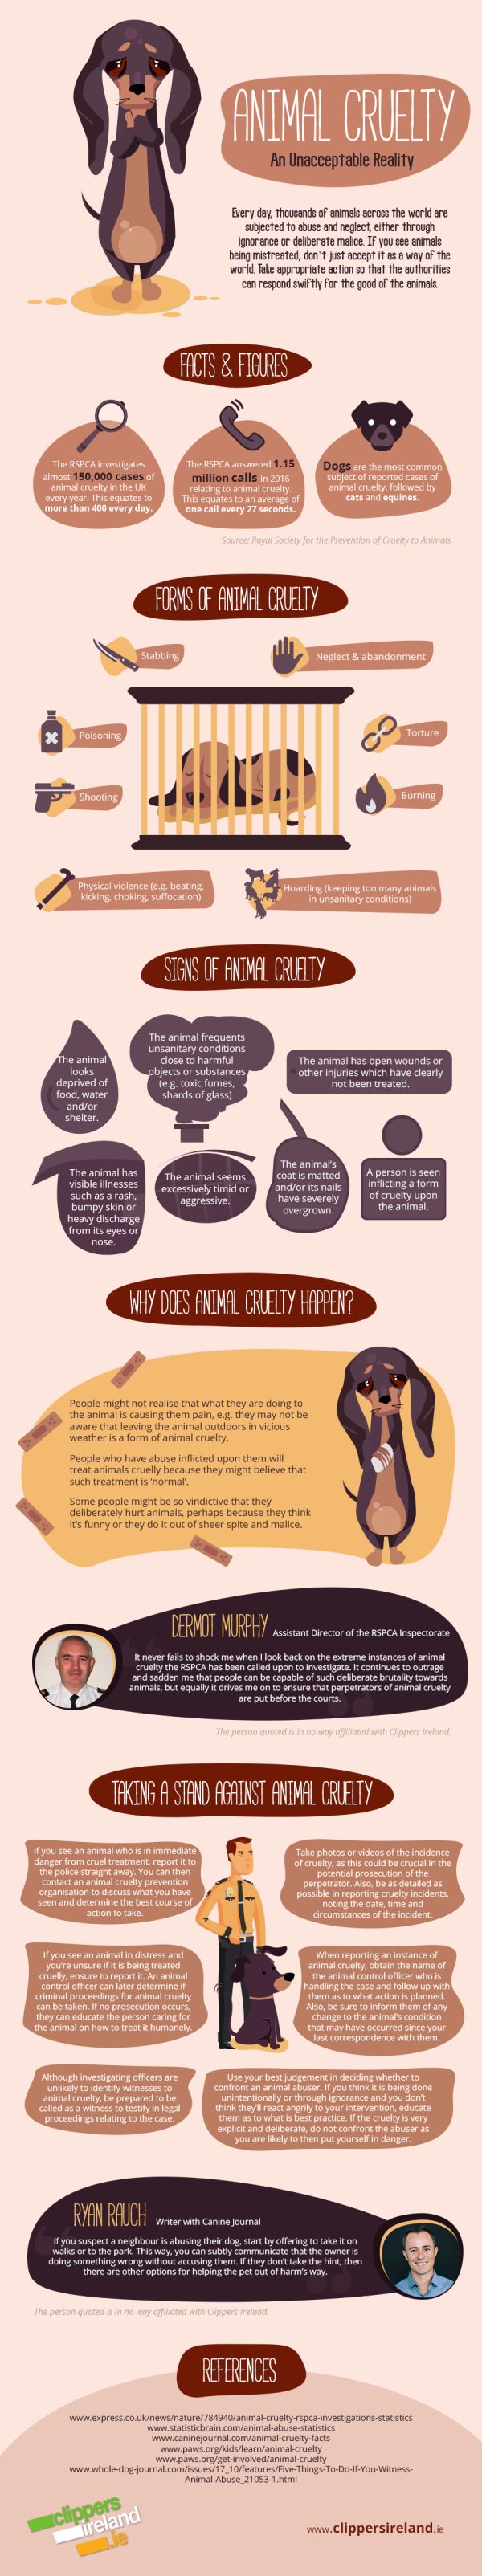 Animal Cruelty: An Unacceptable Reality [Infographic] -